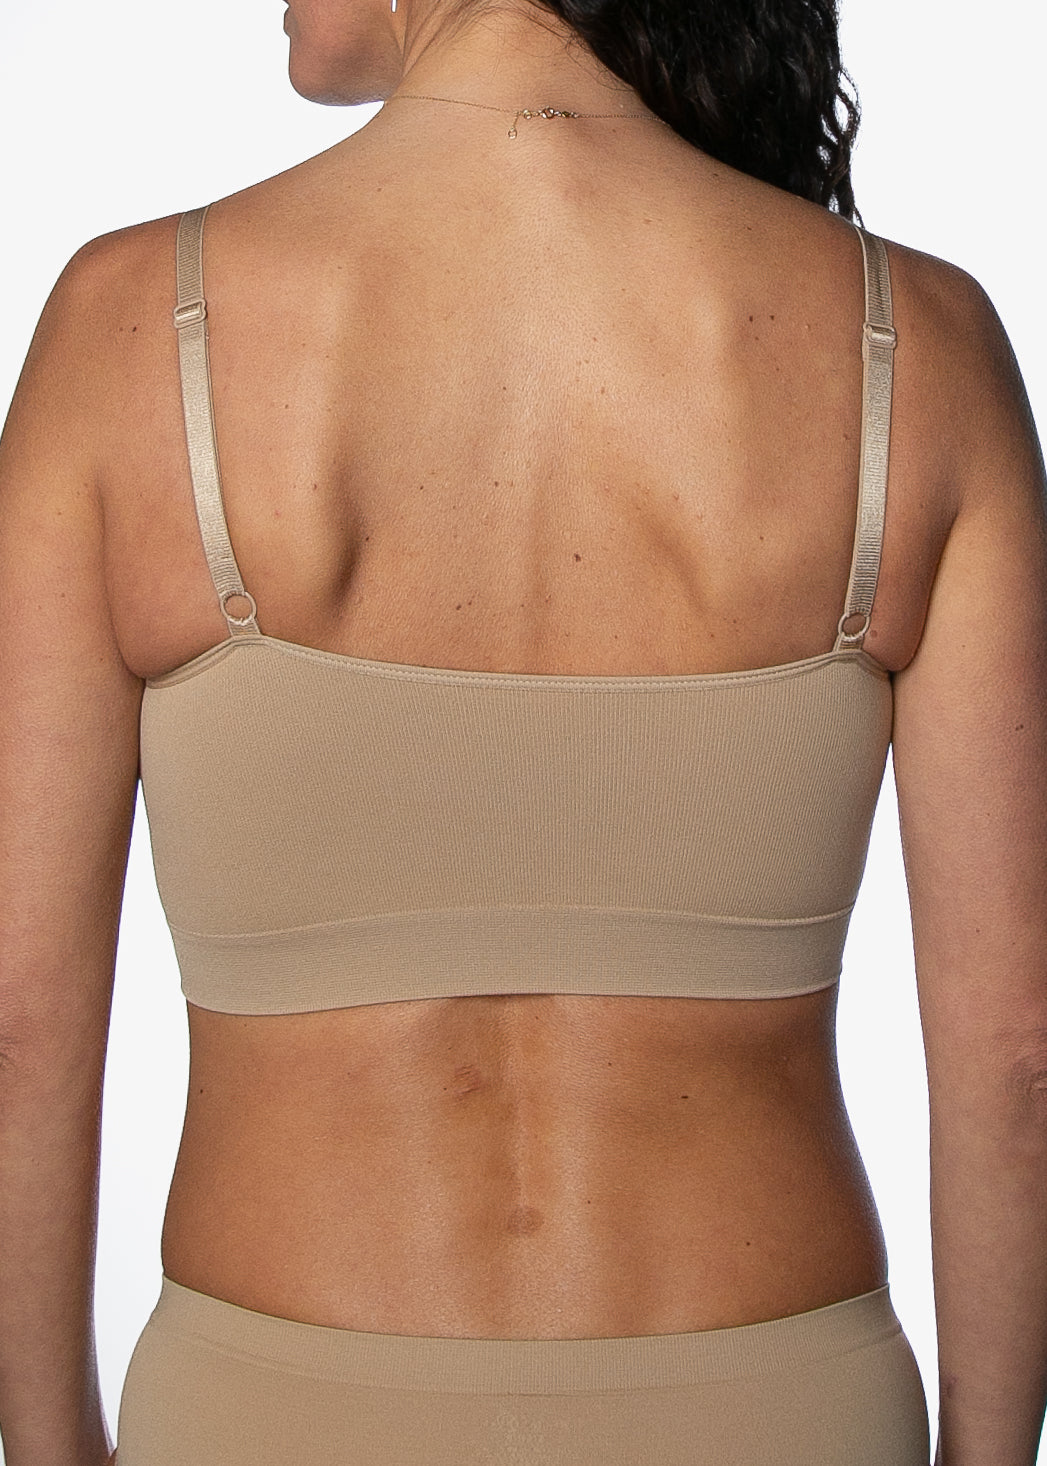 Lasso Padded Inner Bra High Quality Wirefree Rubber Band